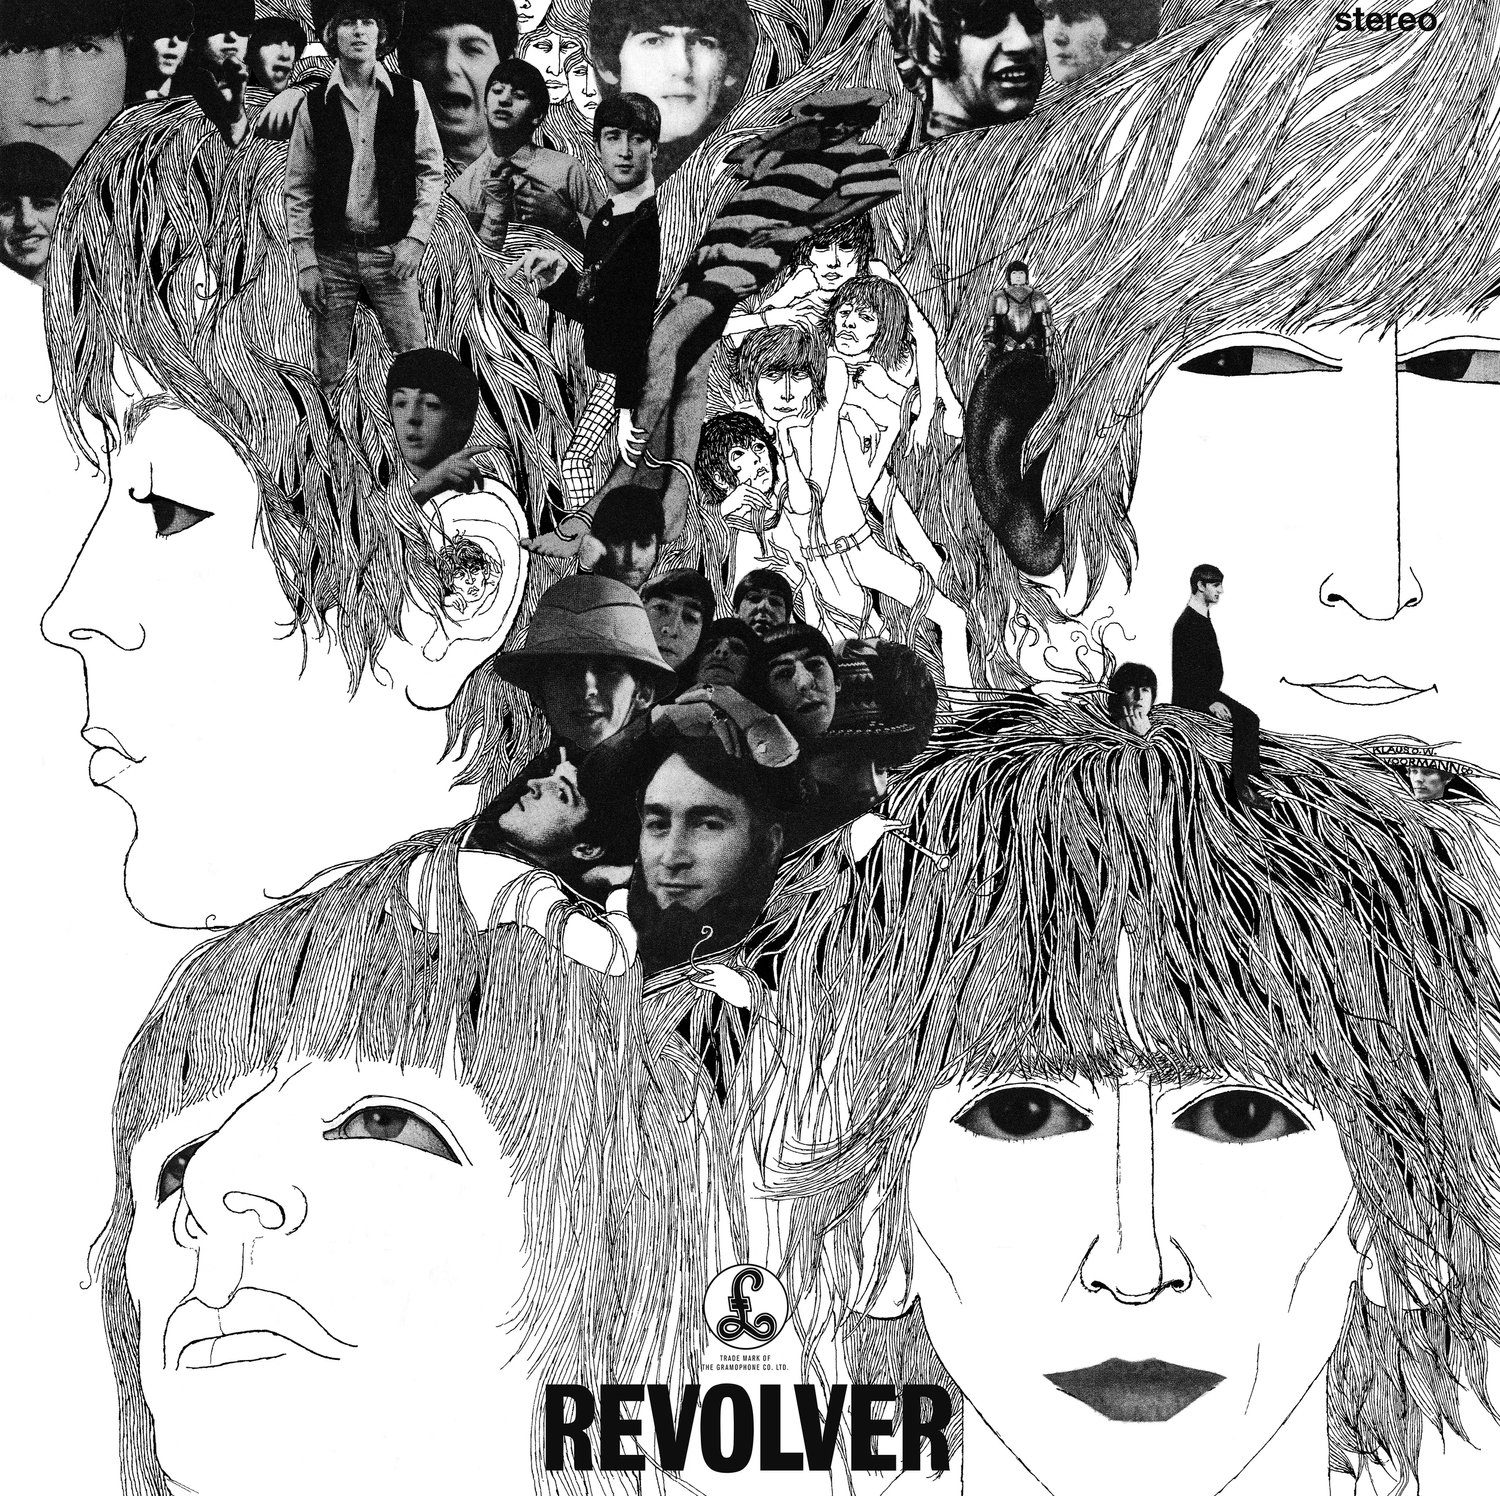 The new Beatles Revolver Special Edition remaster. Just wow.